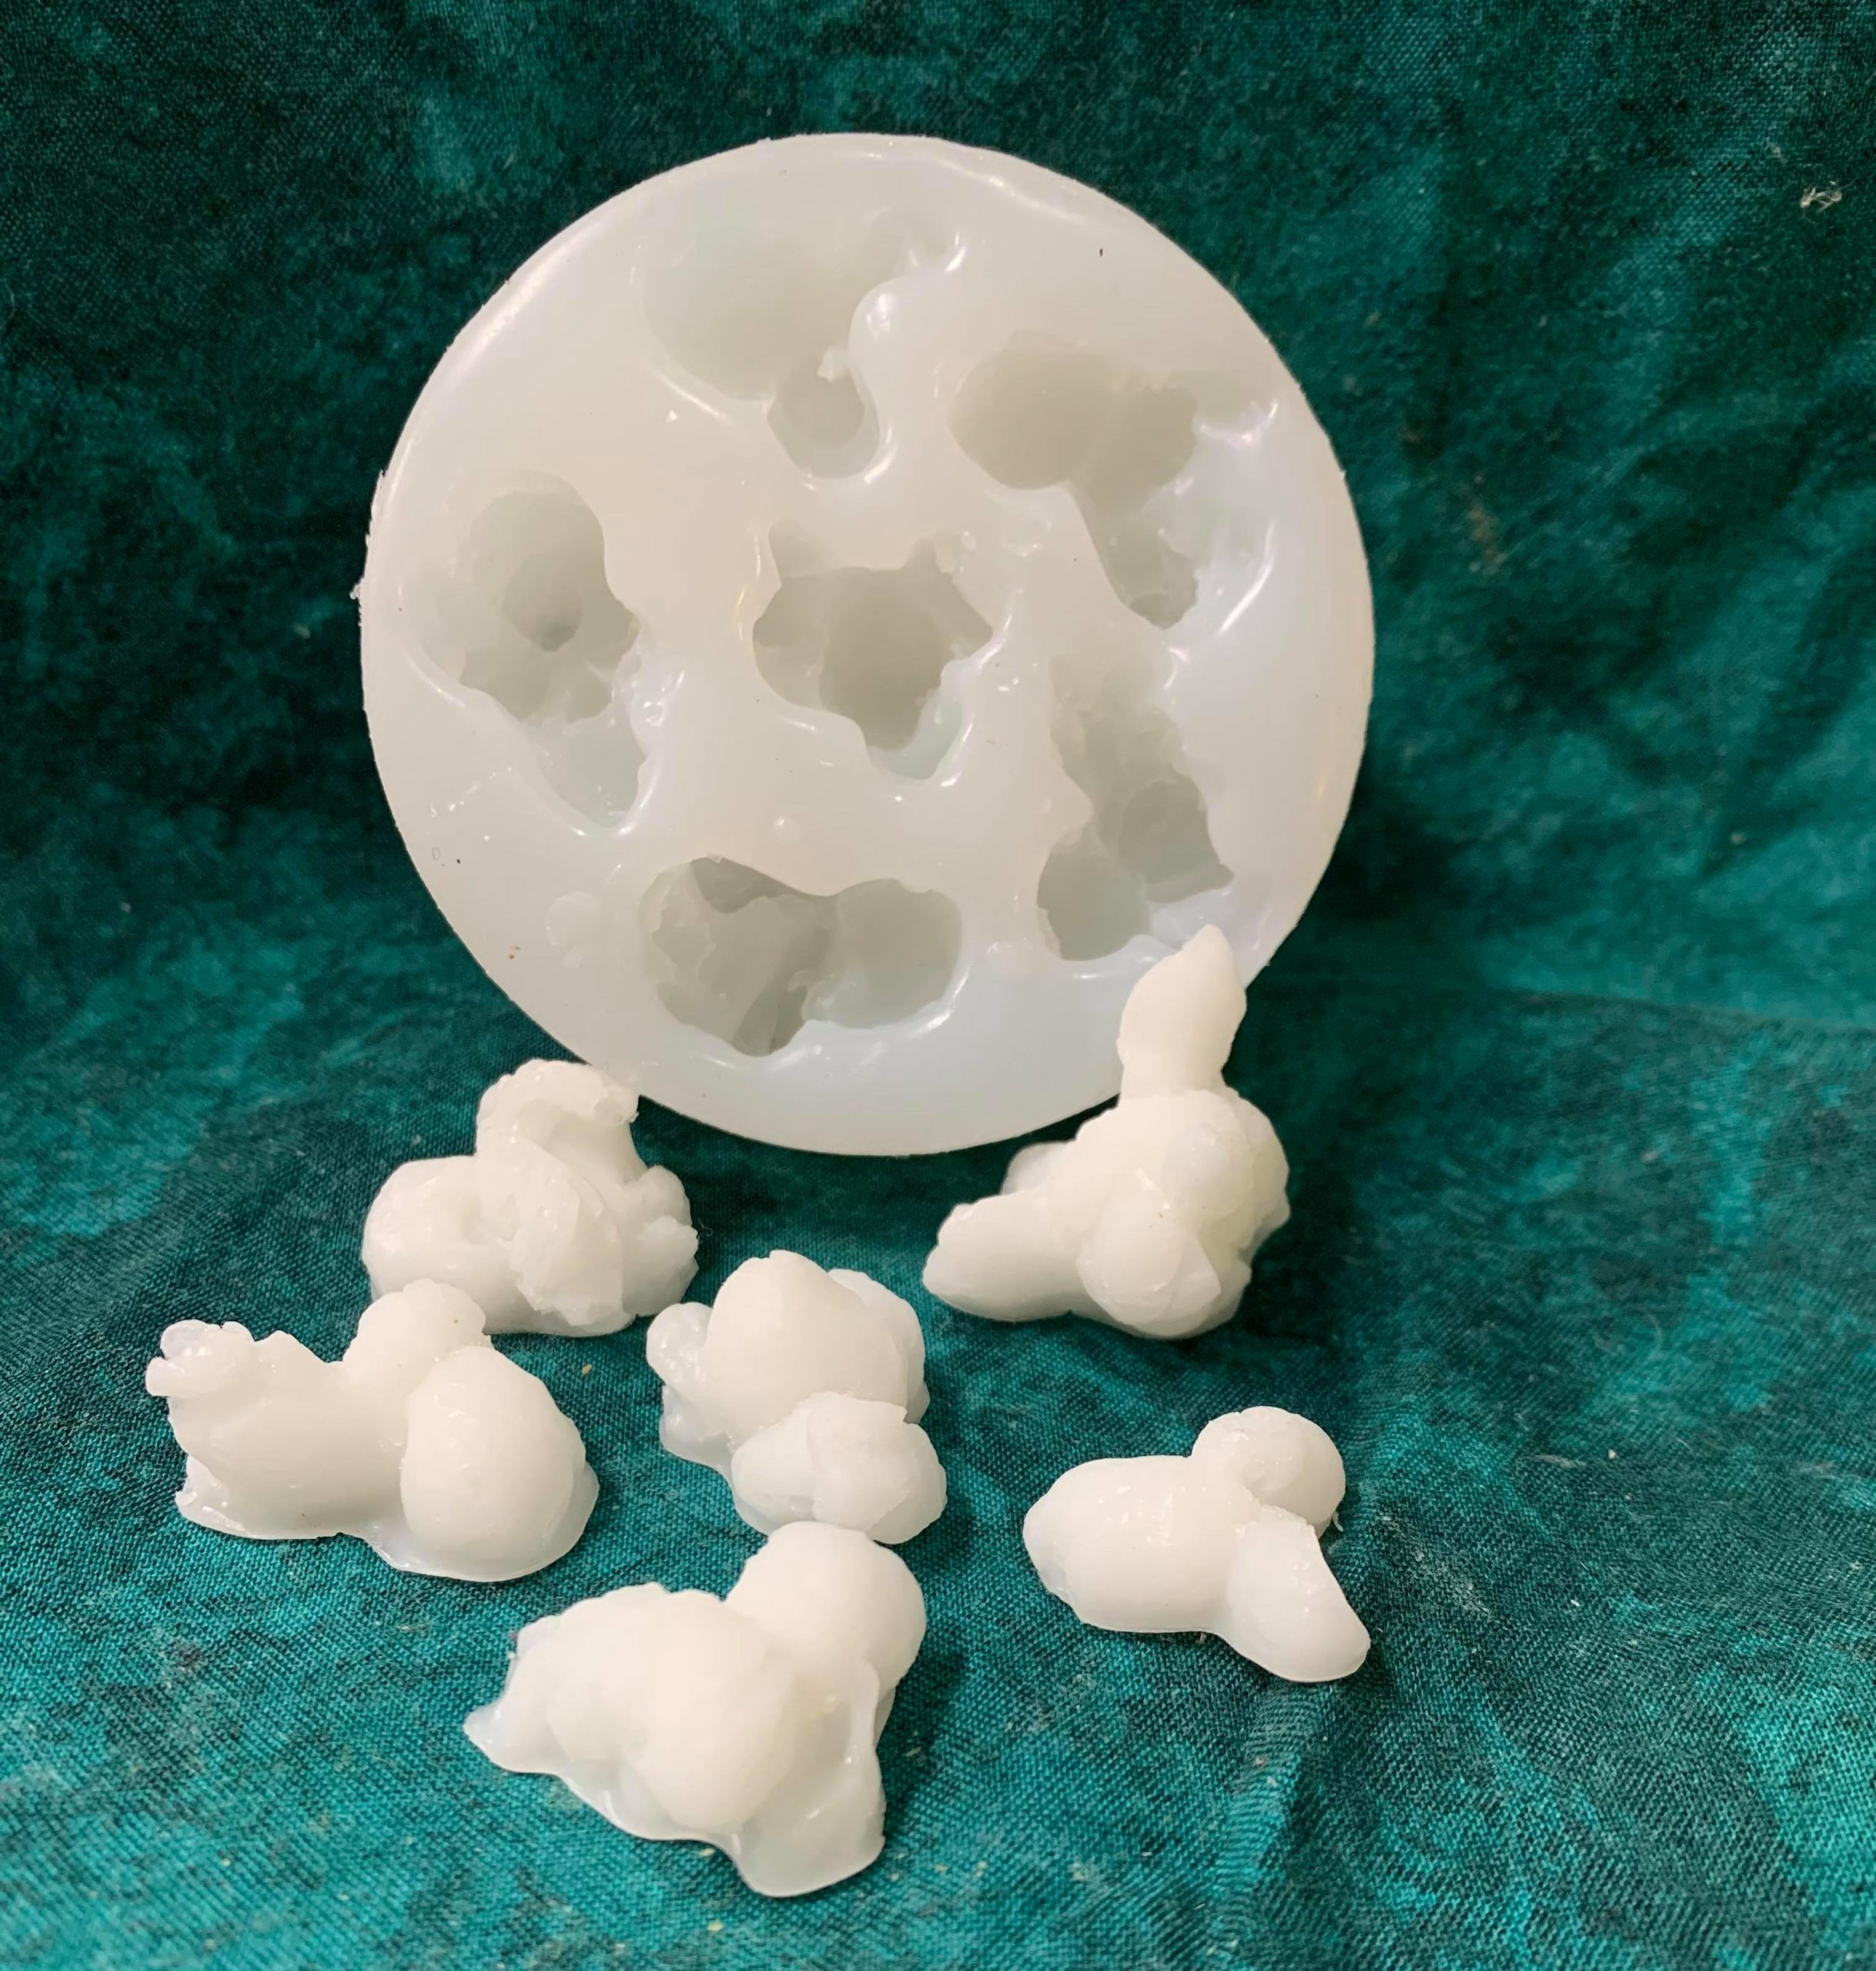 https://www.vanyulay.com/wp-content/uploads/2021/07/Popcorn-Silicone-Mold-6-cavity-2027-scaled.jpg